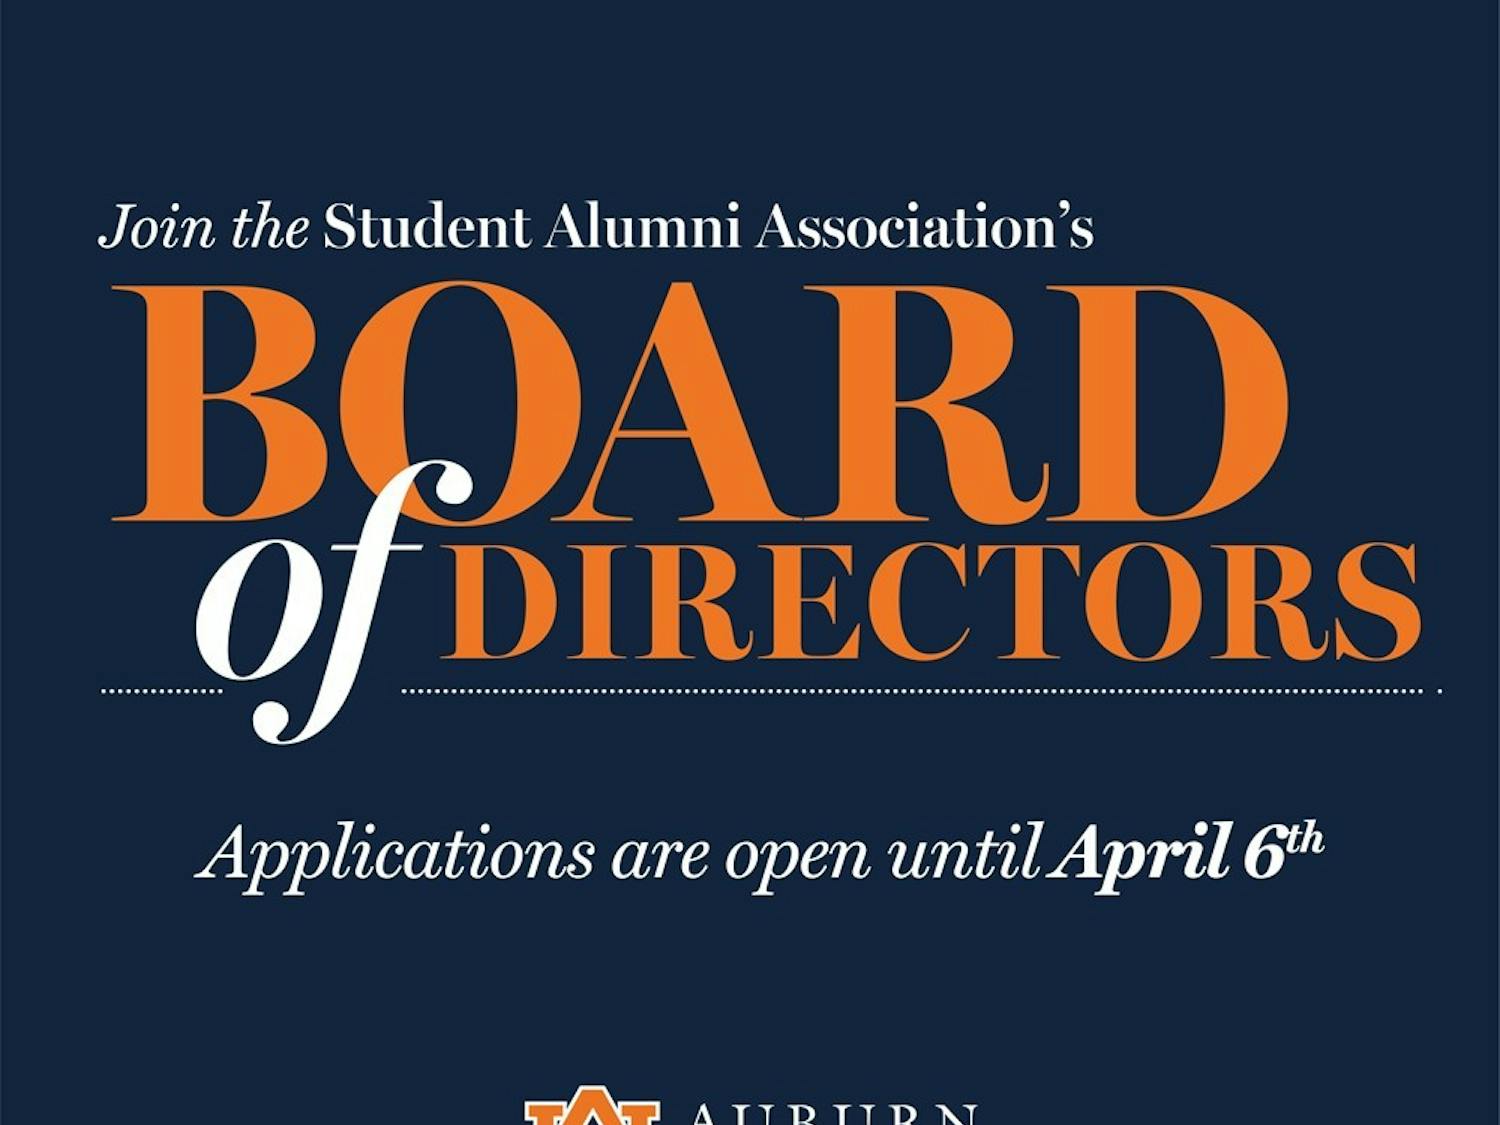 Apply to serve on the Board of Directors! Applications are available until April 6, 2018 and interviews will be held April 10, 2018 – April 12, 2018.